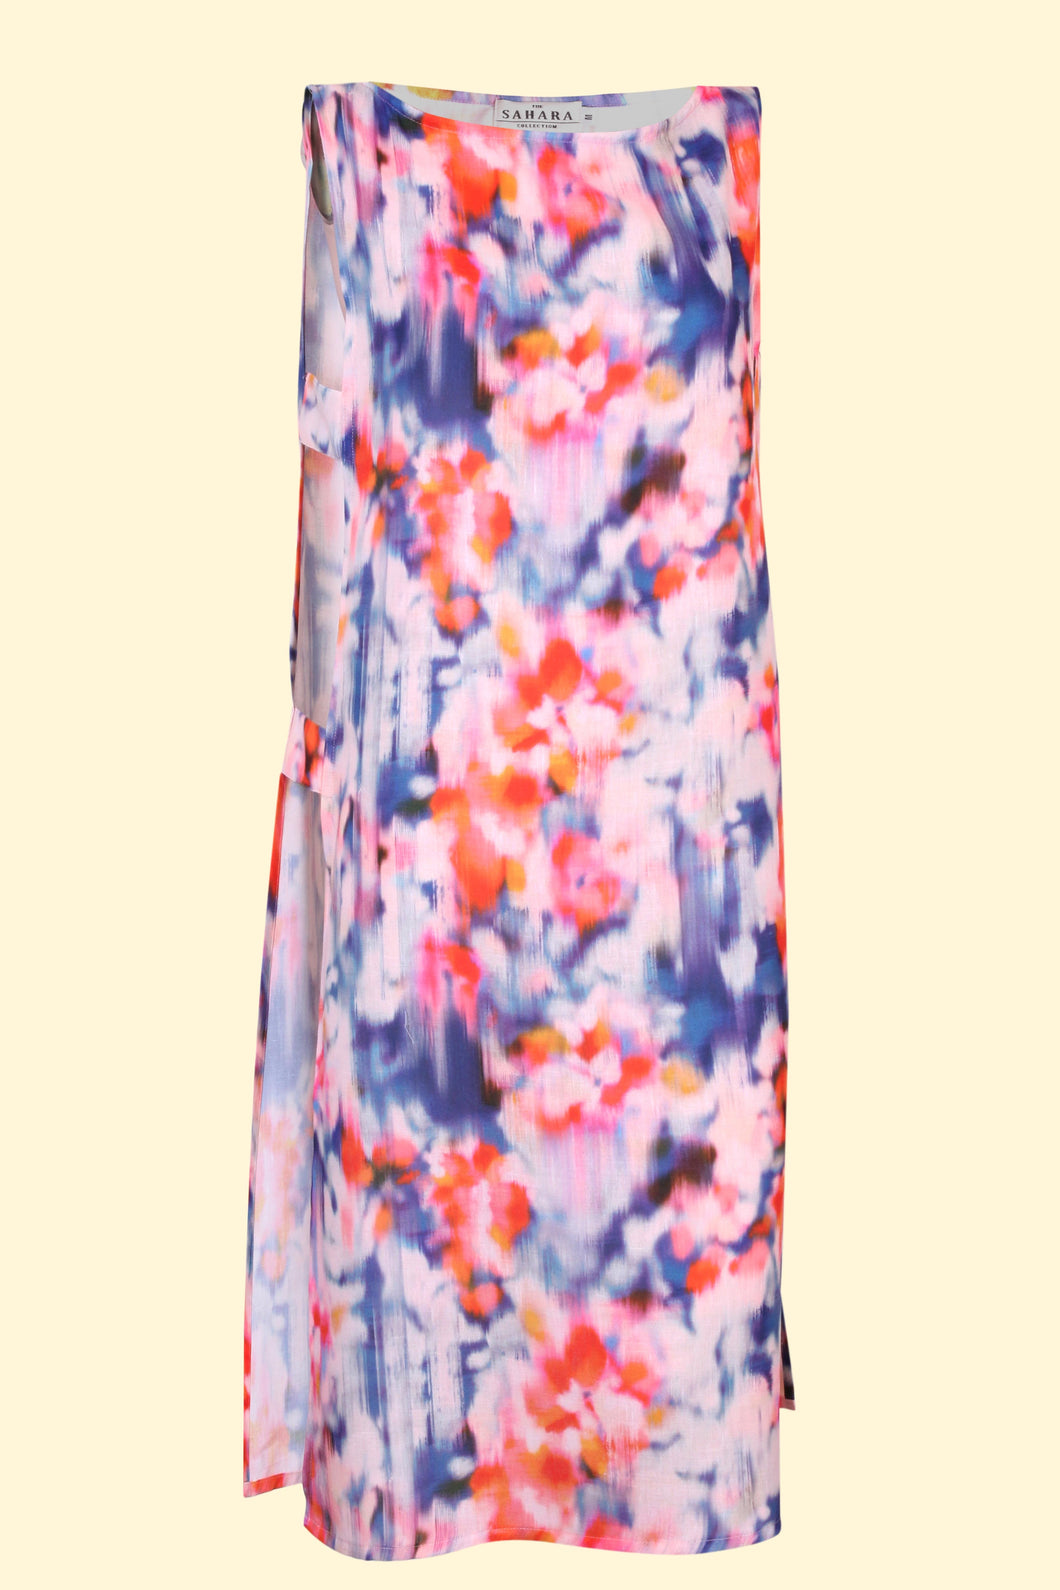 Floral Abstract Cut Out Dress.